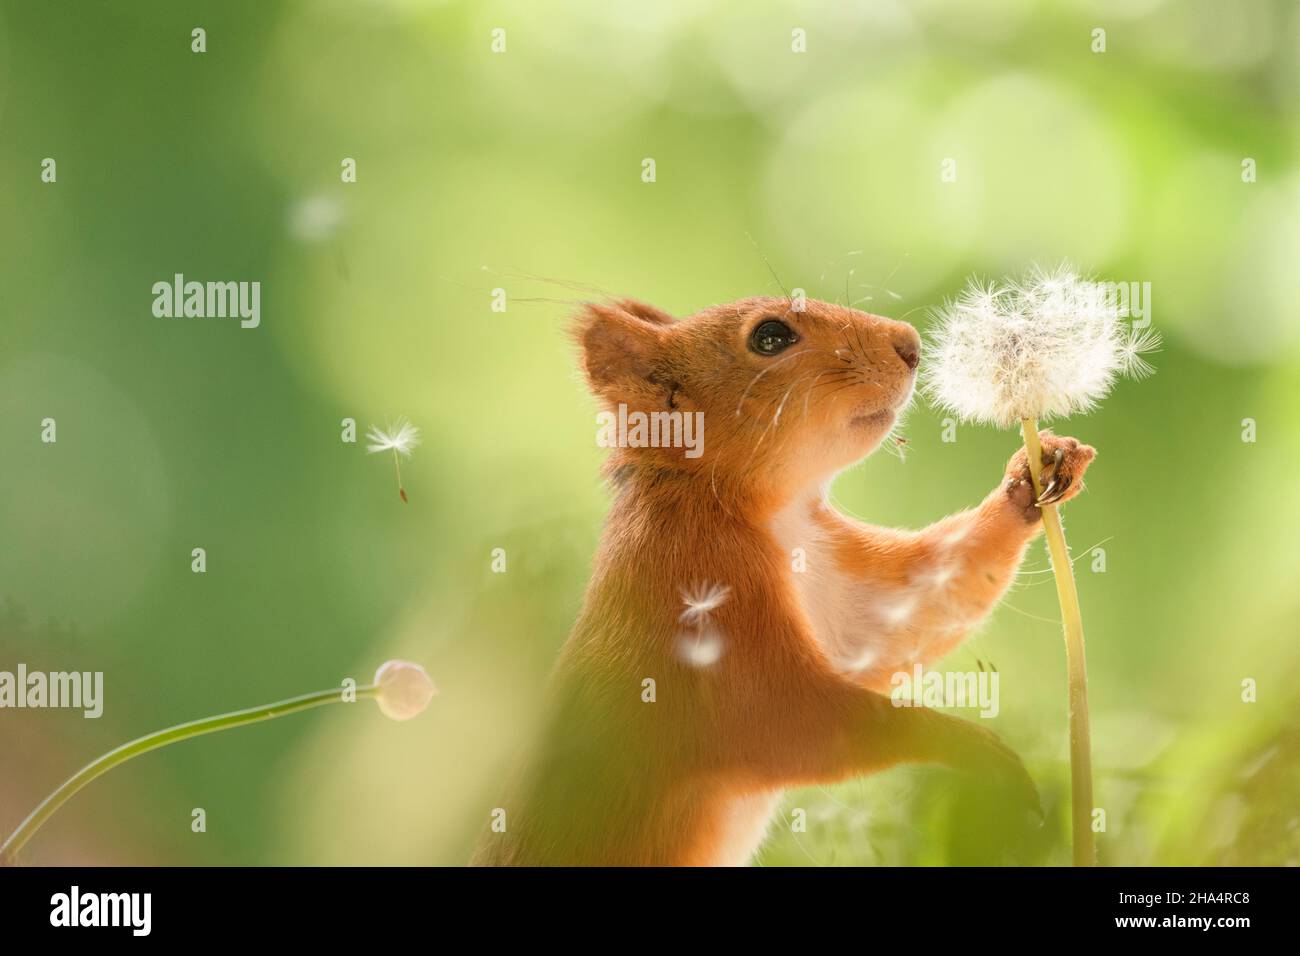 red squirrels is holding a dandelion stem seeds flying away Stock Photo